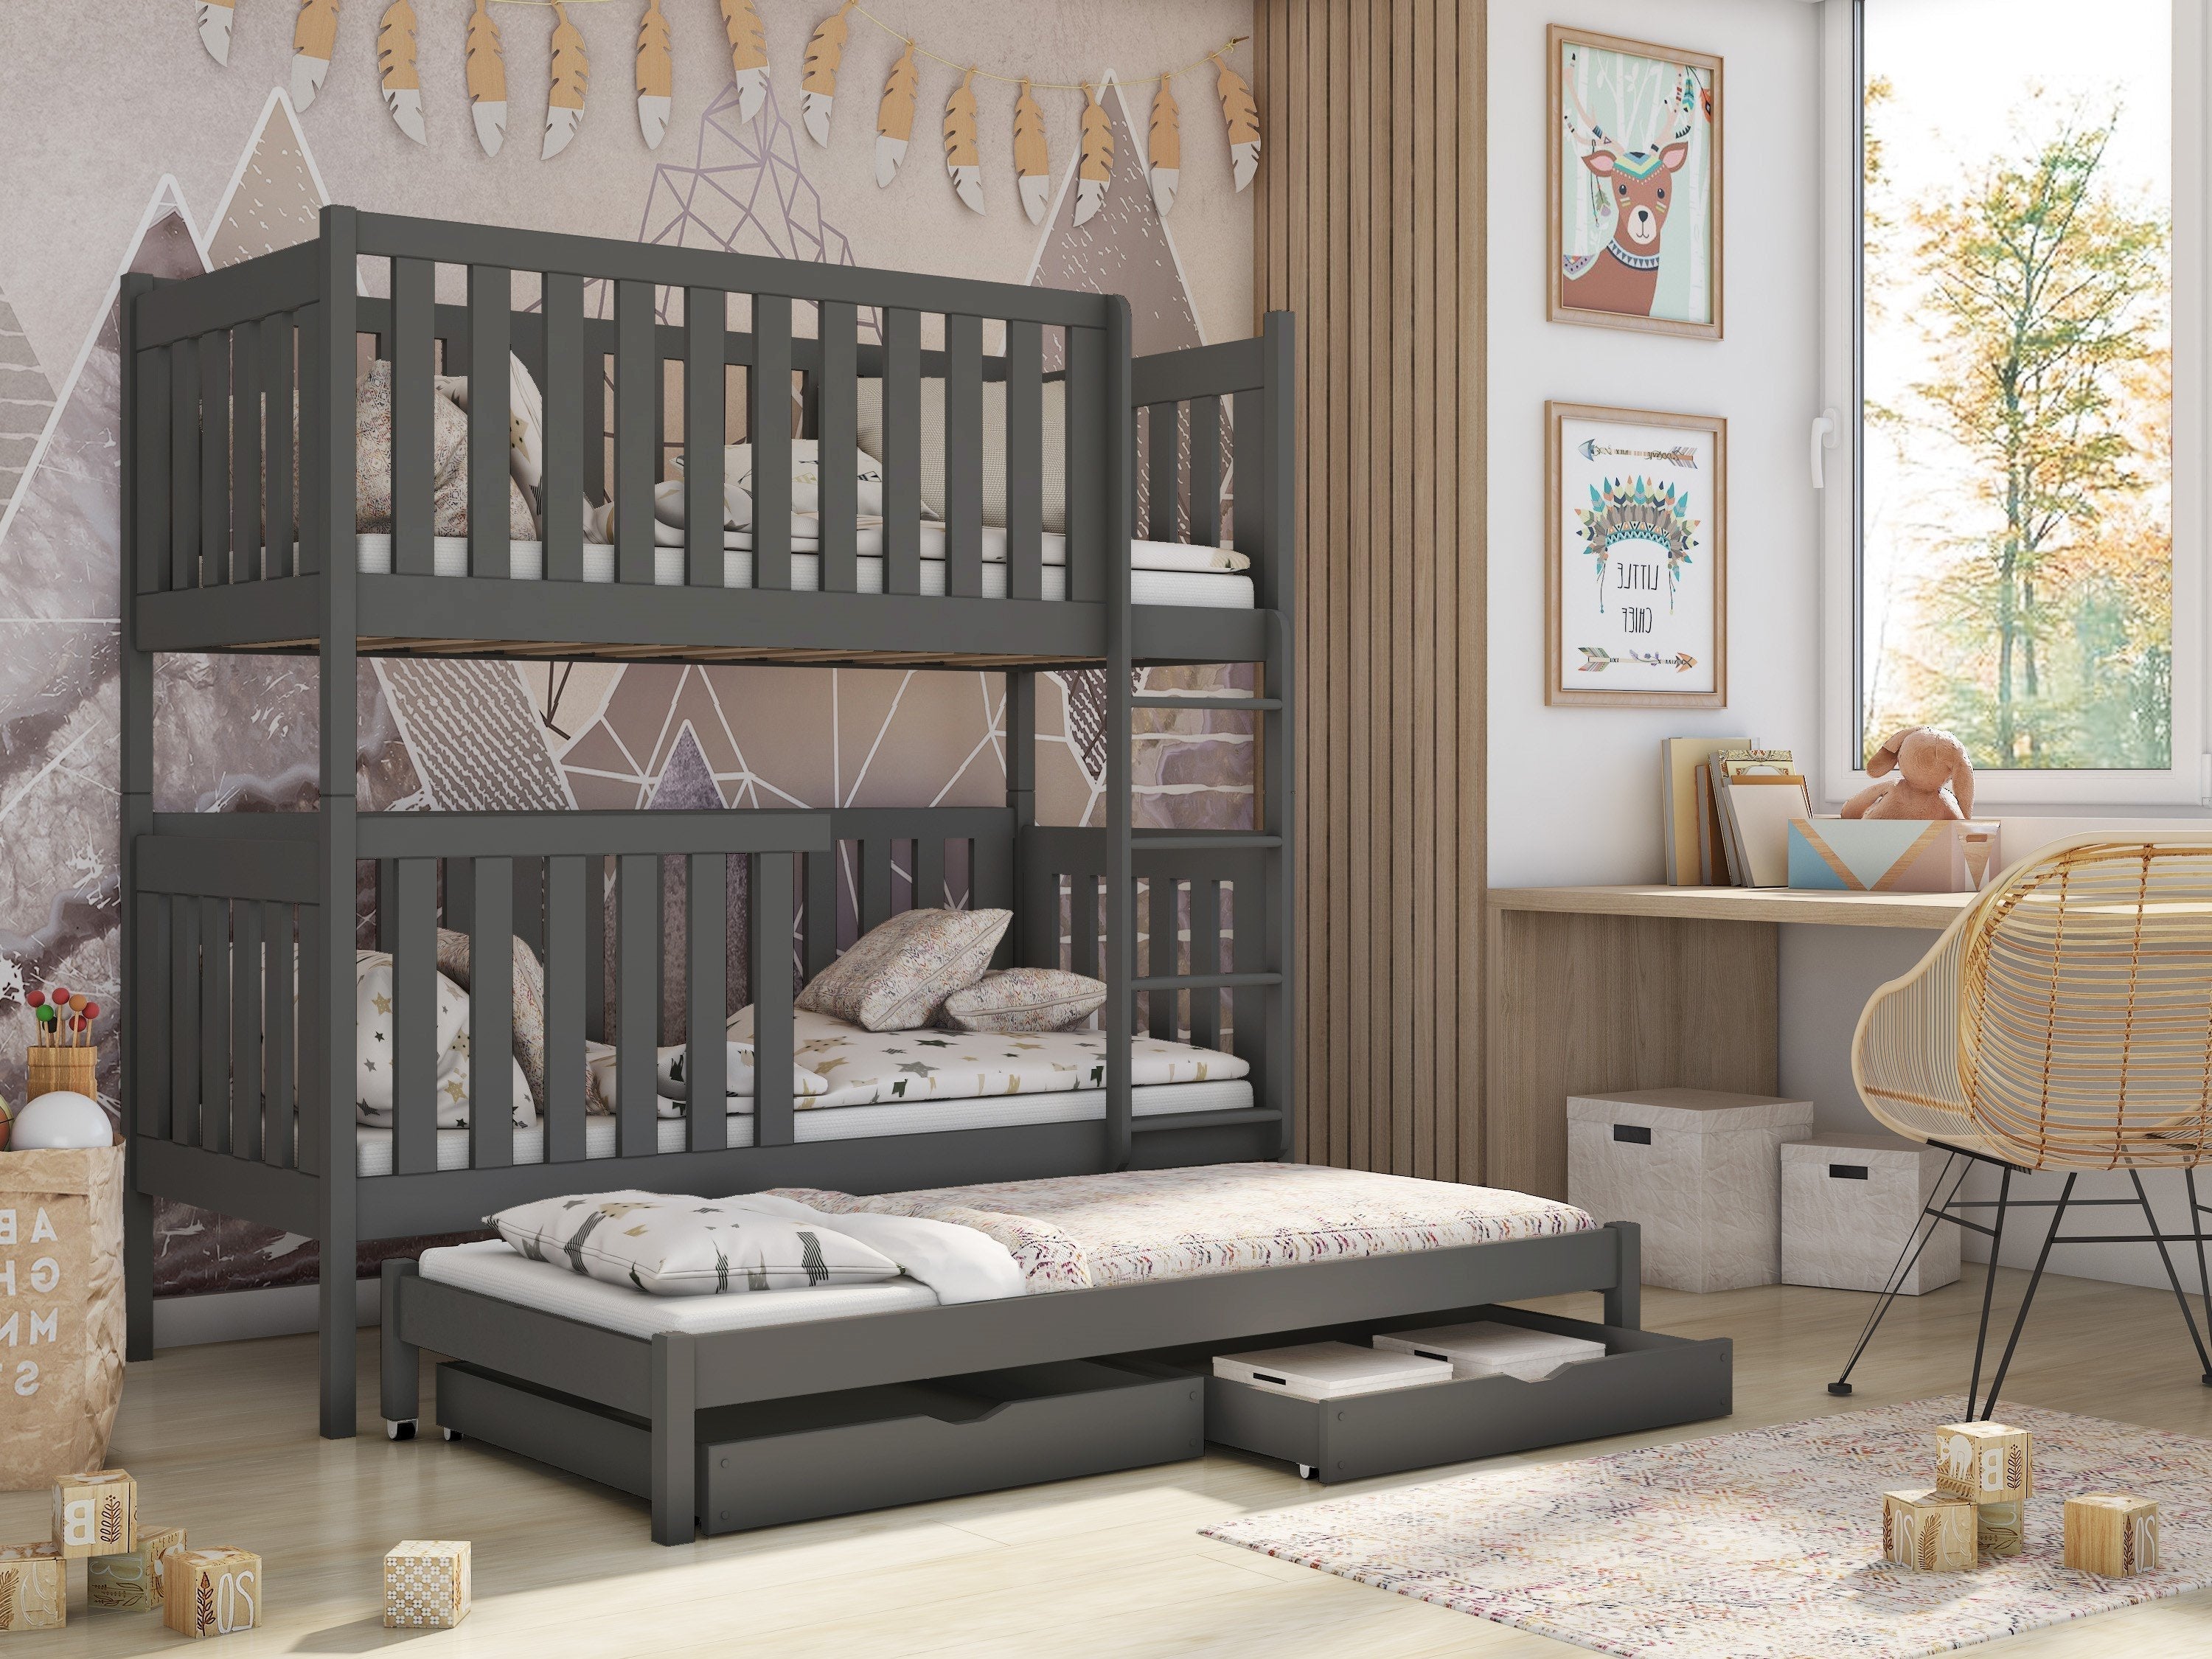 View Wooden Bunk Bed Emily with Trundle and Storage Graphite Without Mattresses information